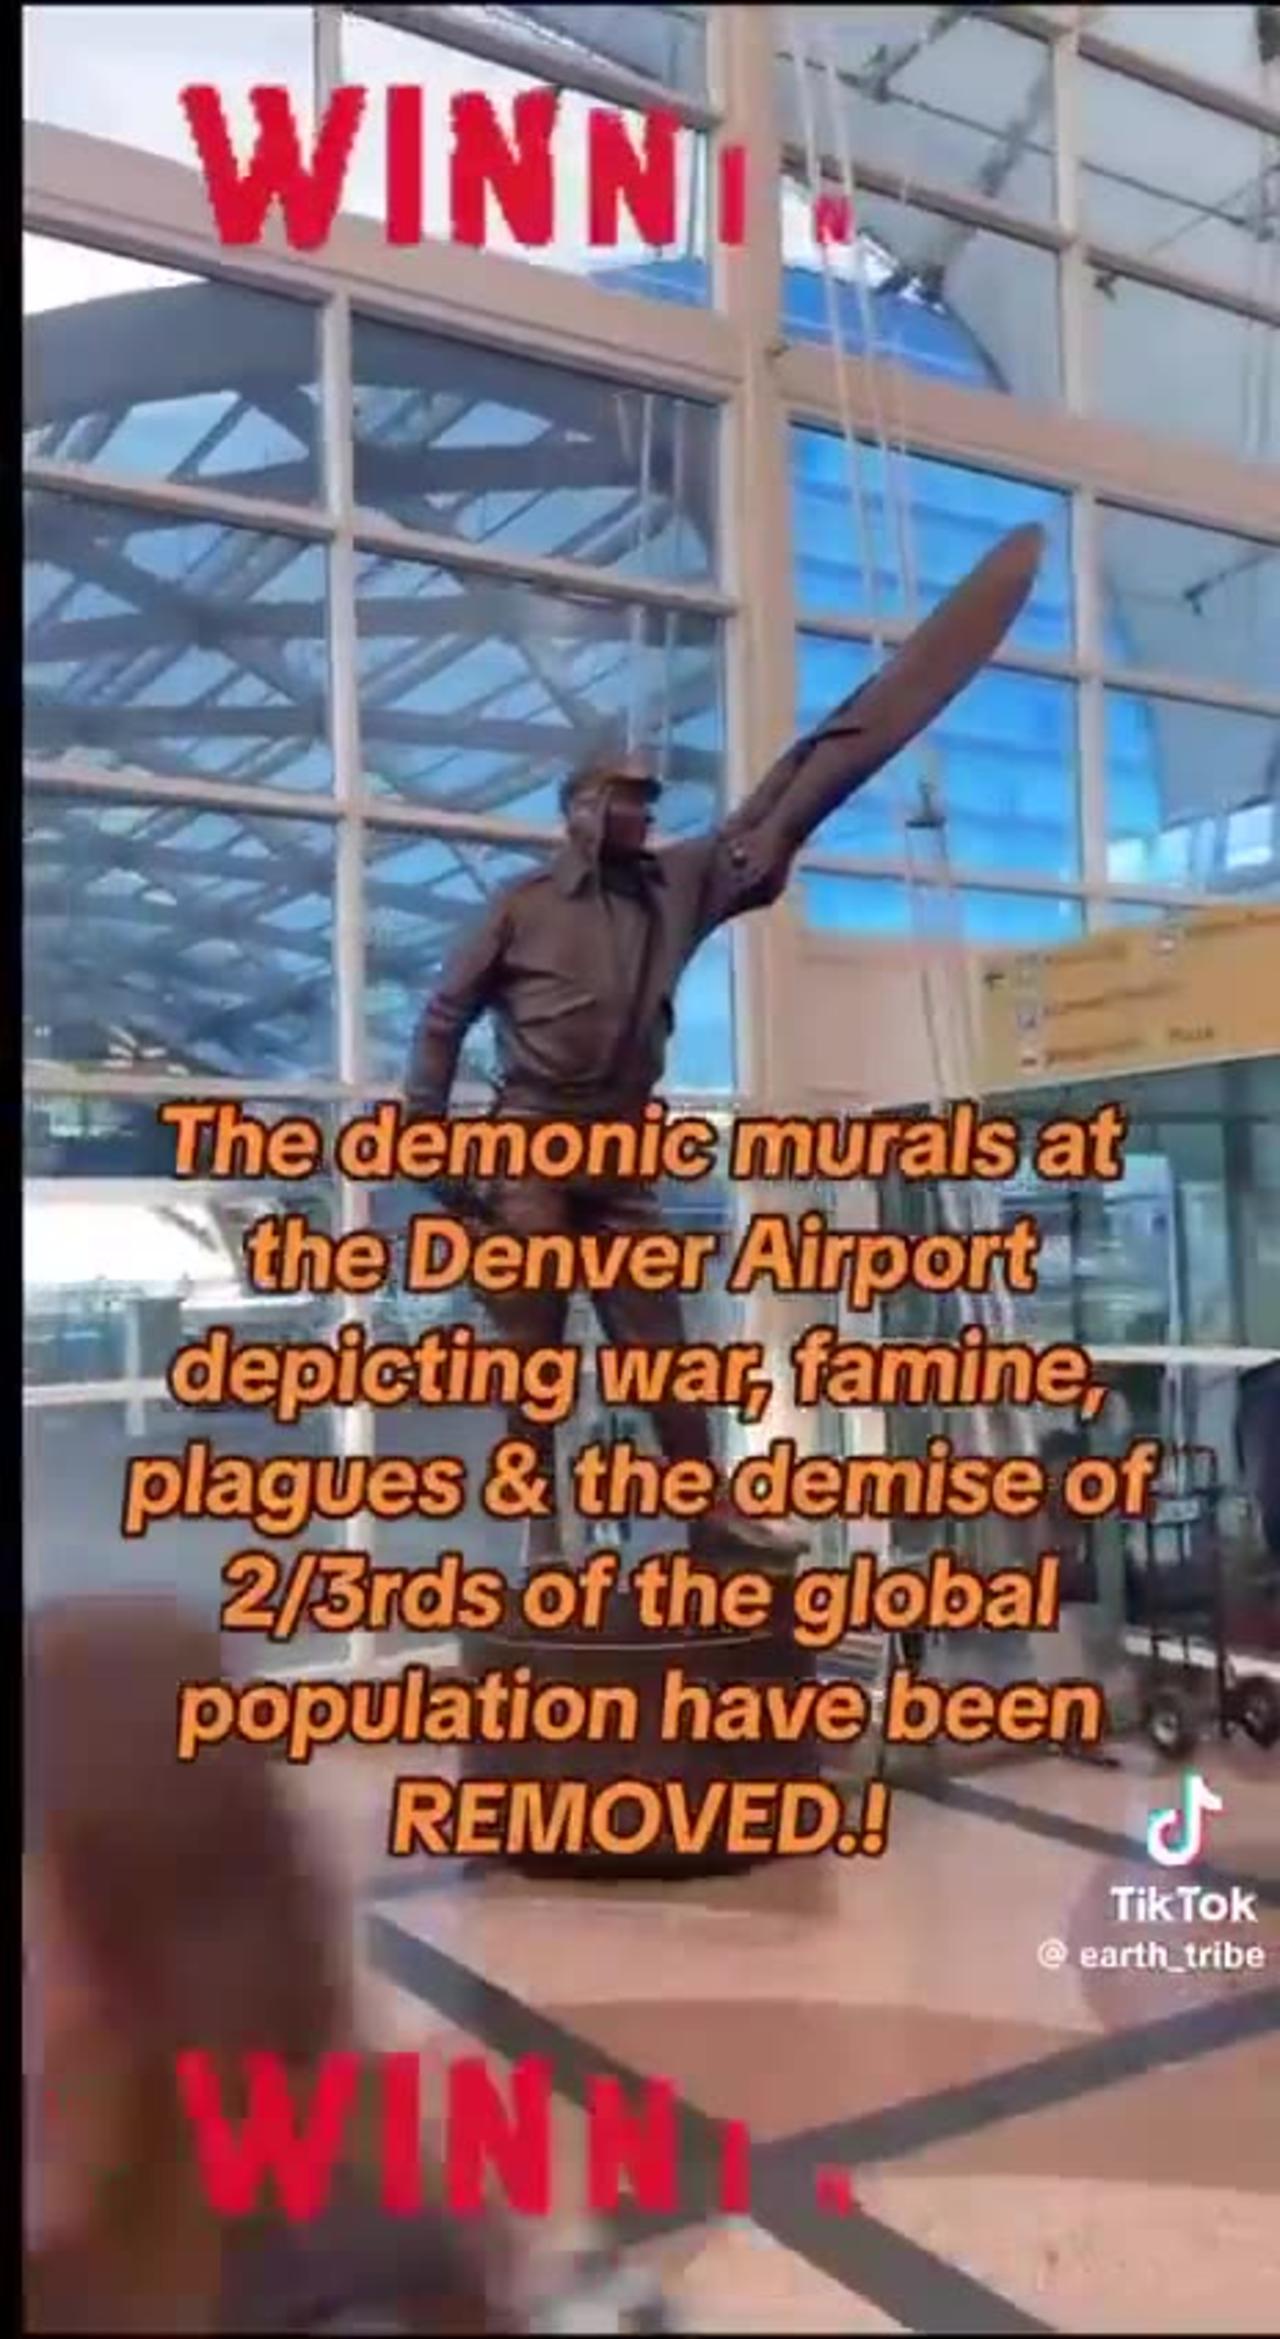 Statues depicting famine in Denver Airport removed.